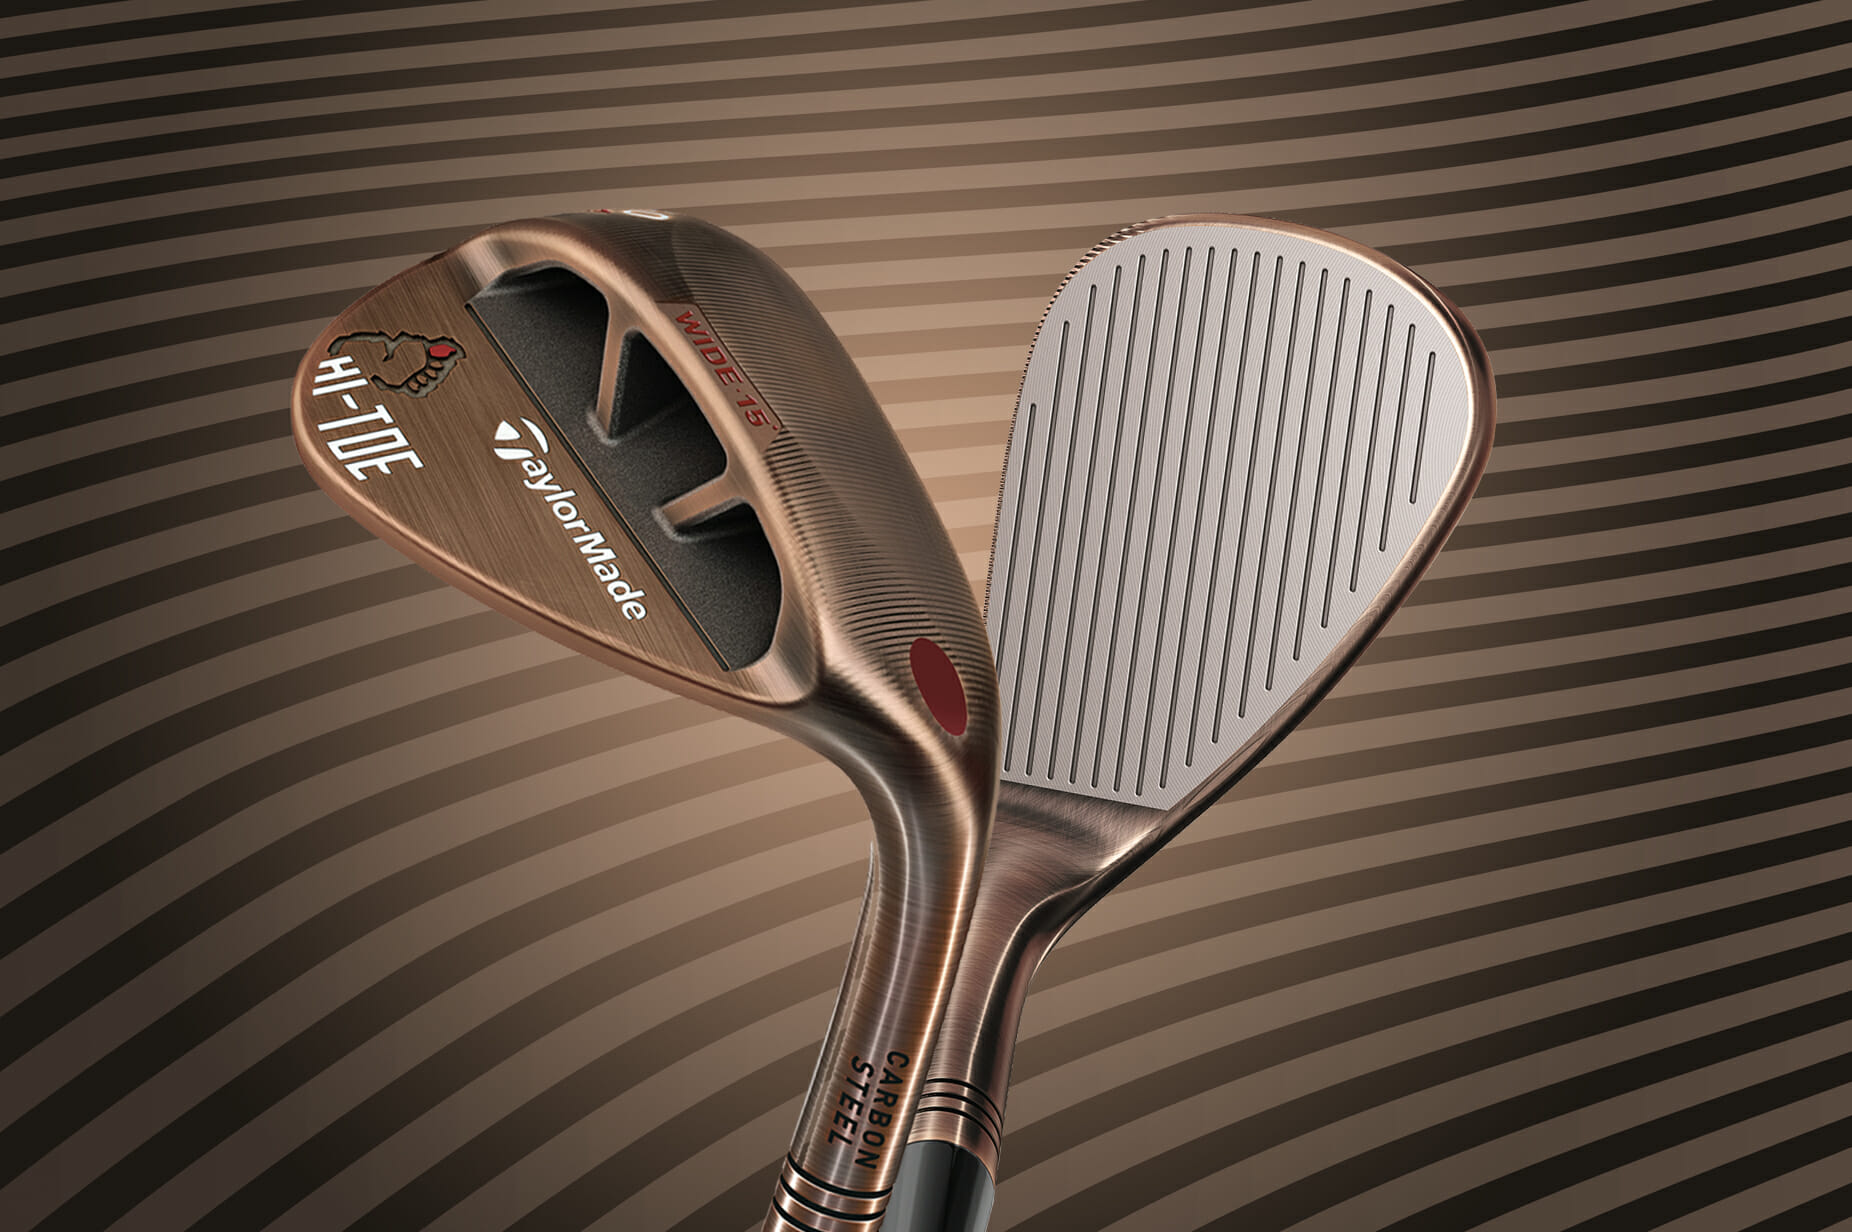 TaylorMade Hi-Toe Big Foot wedge – A new game-improvement wedge featuring a super wide sole